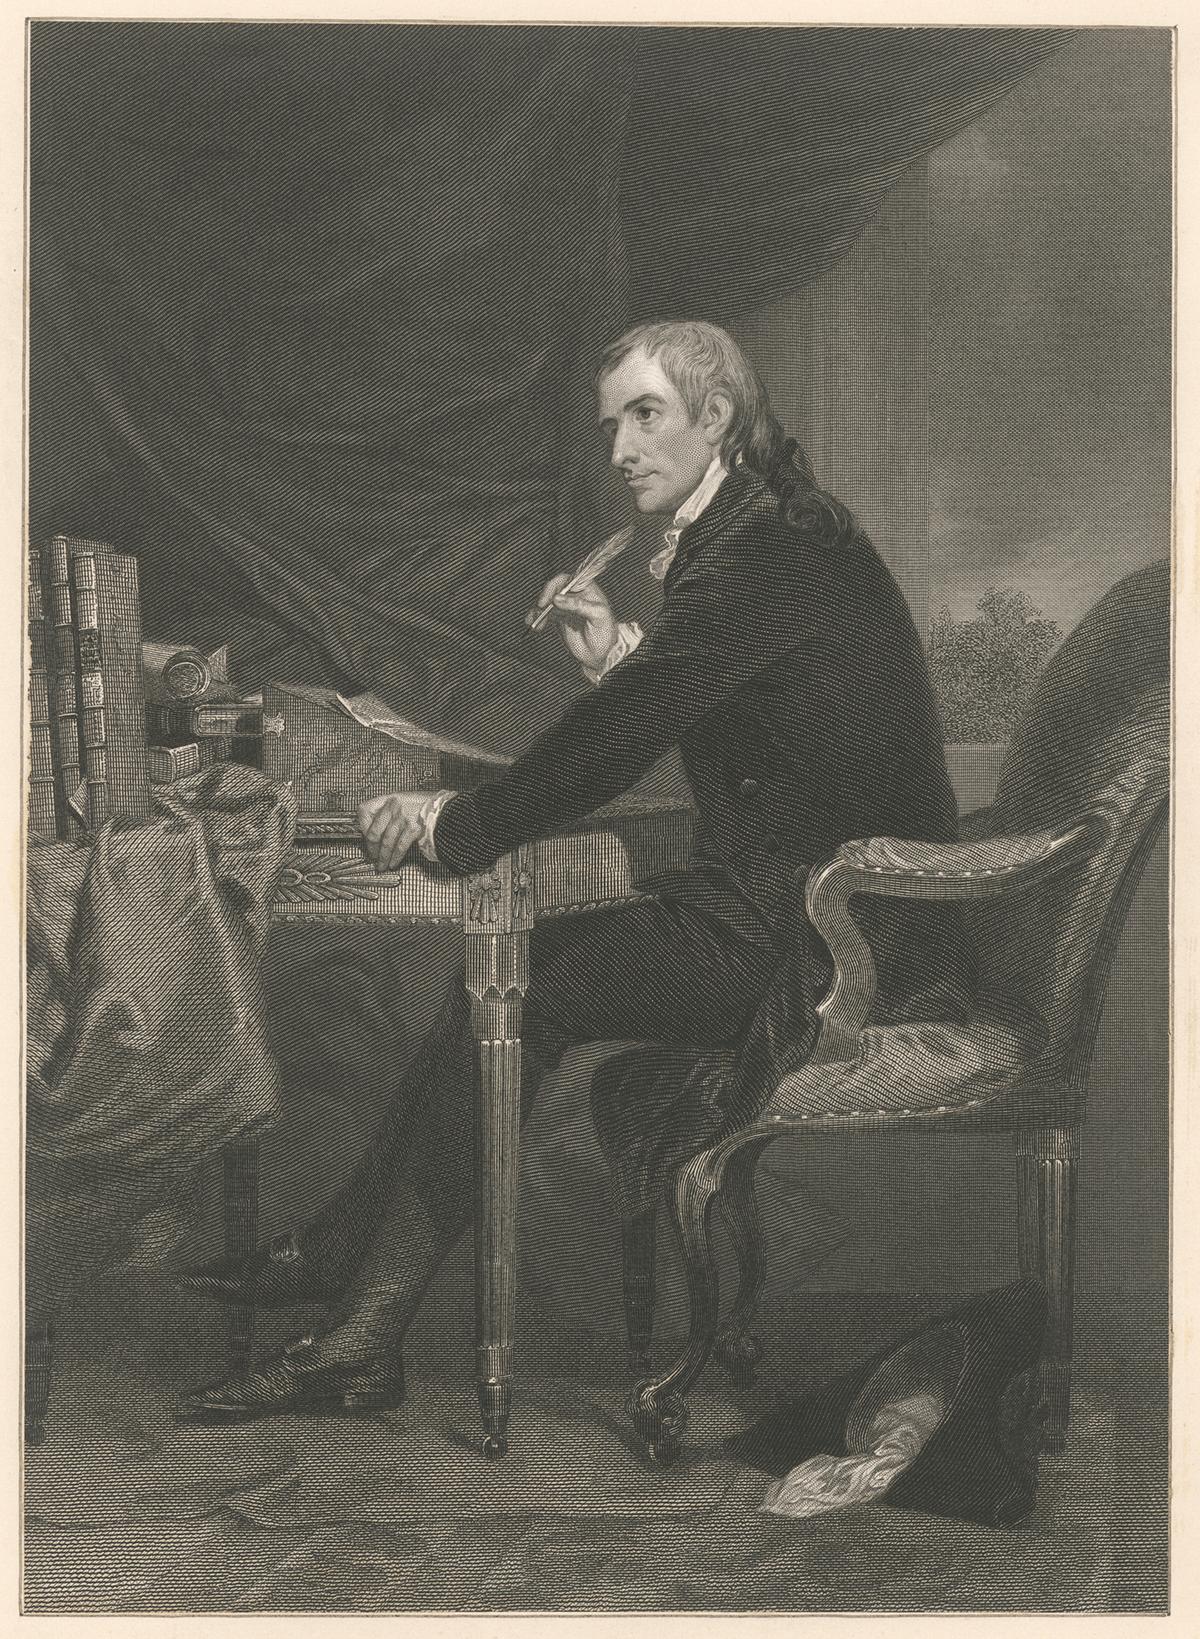 A print of Francis Hopkinson after the 1785 painting by Robert Edge Pine. New York Public Library. (Public Domain)